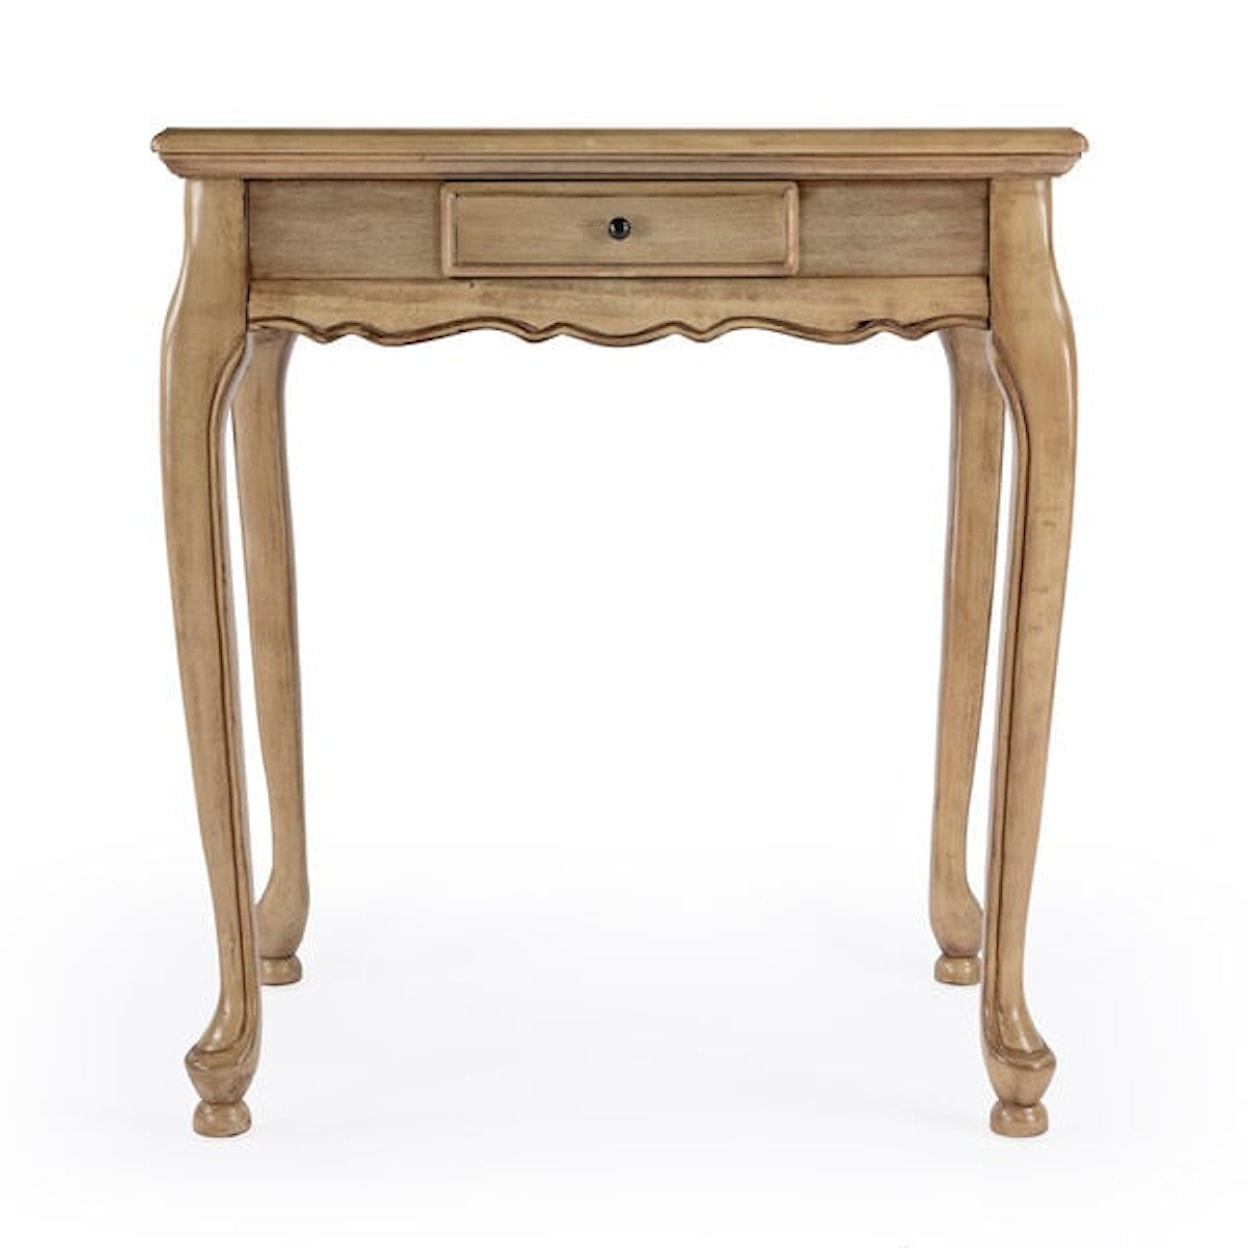 Butler Specialty Company GAME TABLES Bannockburn Square Game Table in Tan/Beige